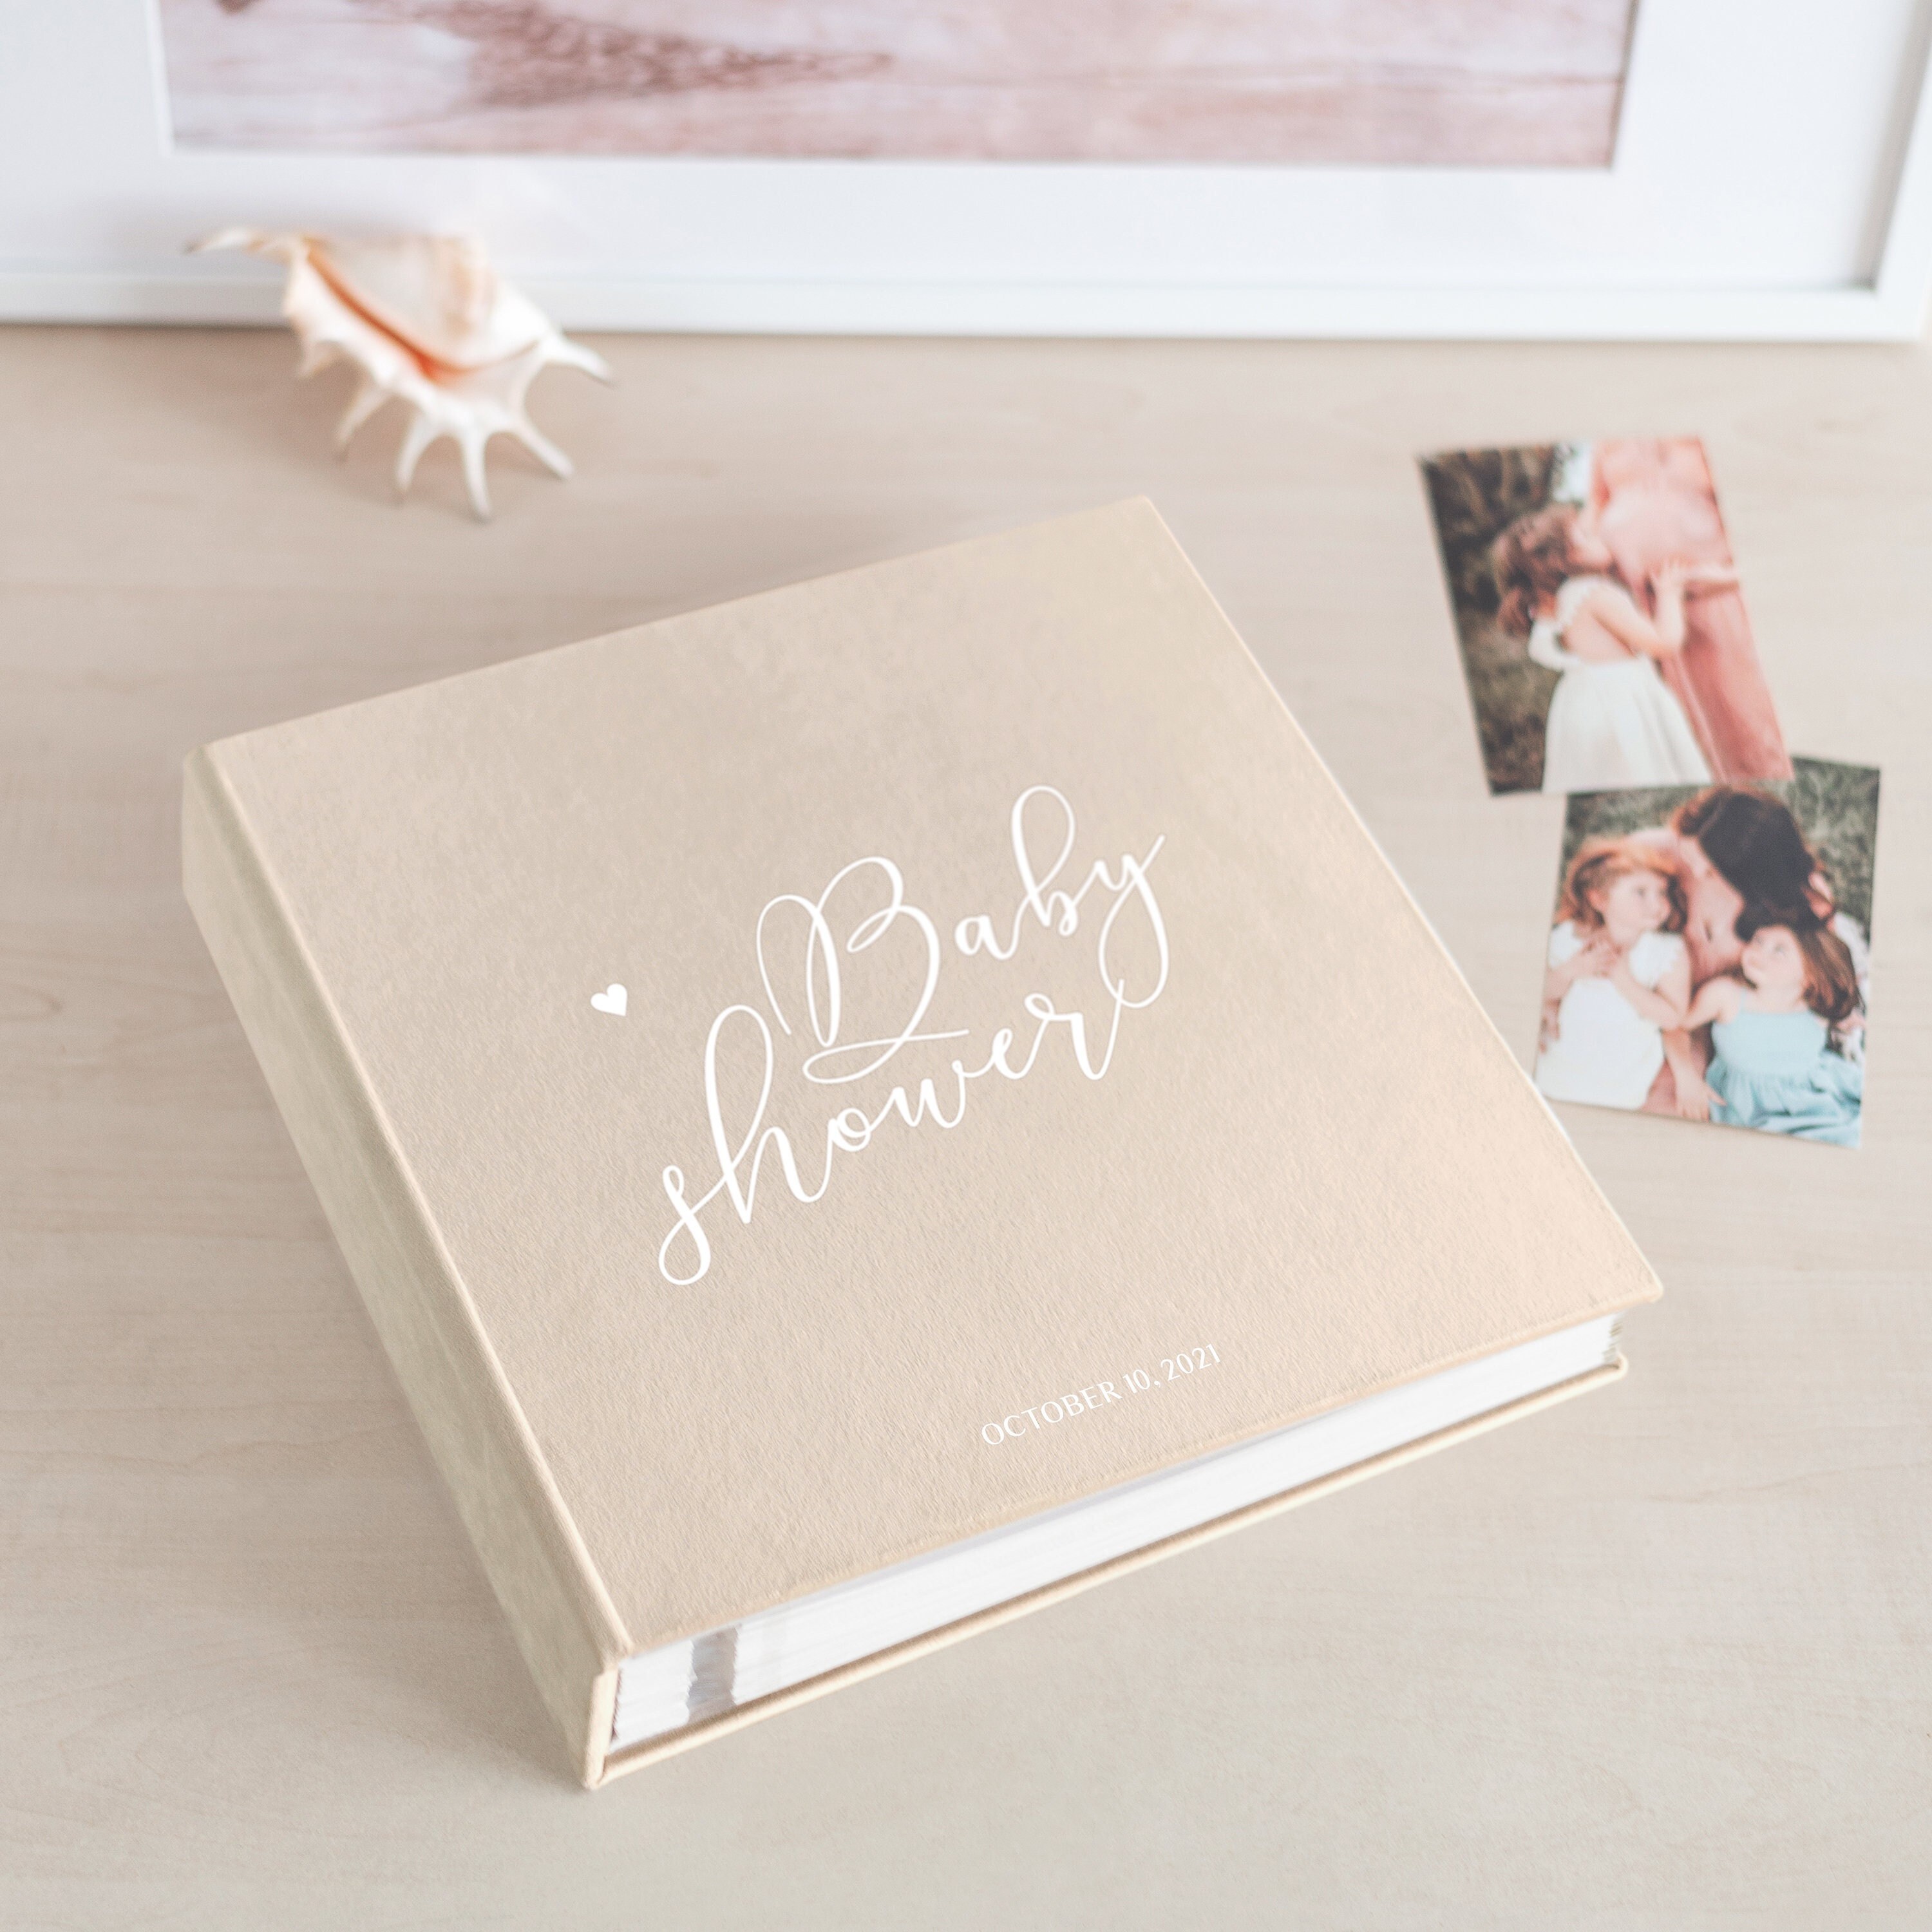 Polaroid Album Guestbook Baby Showers New Blank Guest Book Pink Blush Weddings 